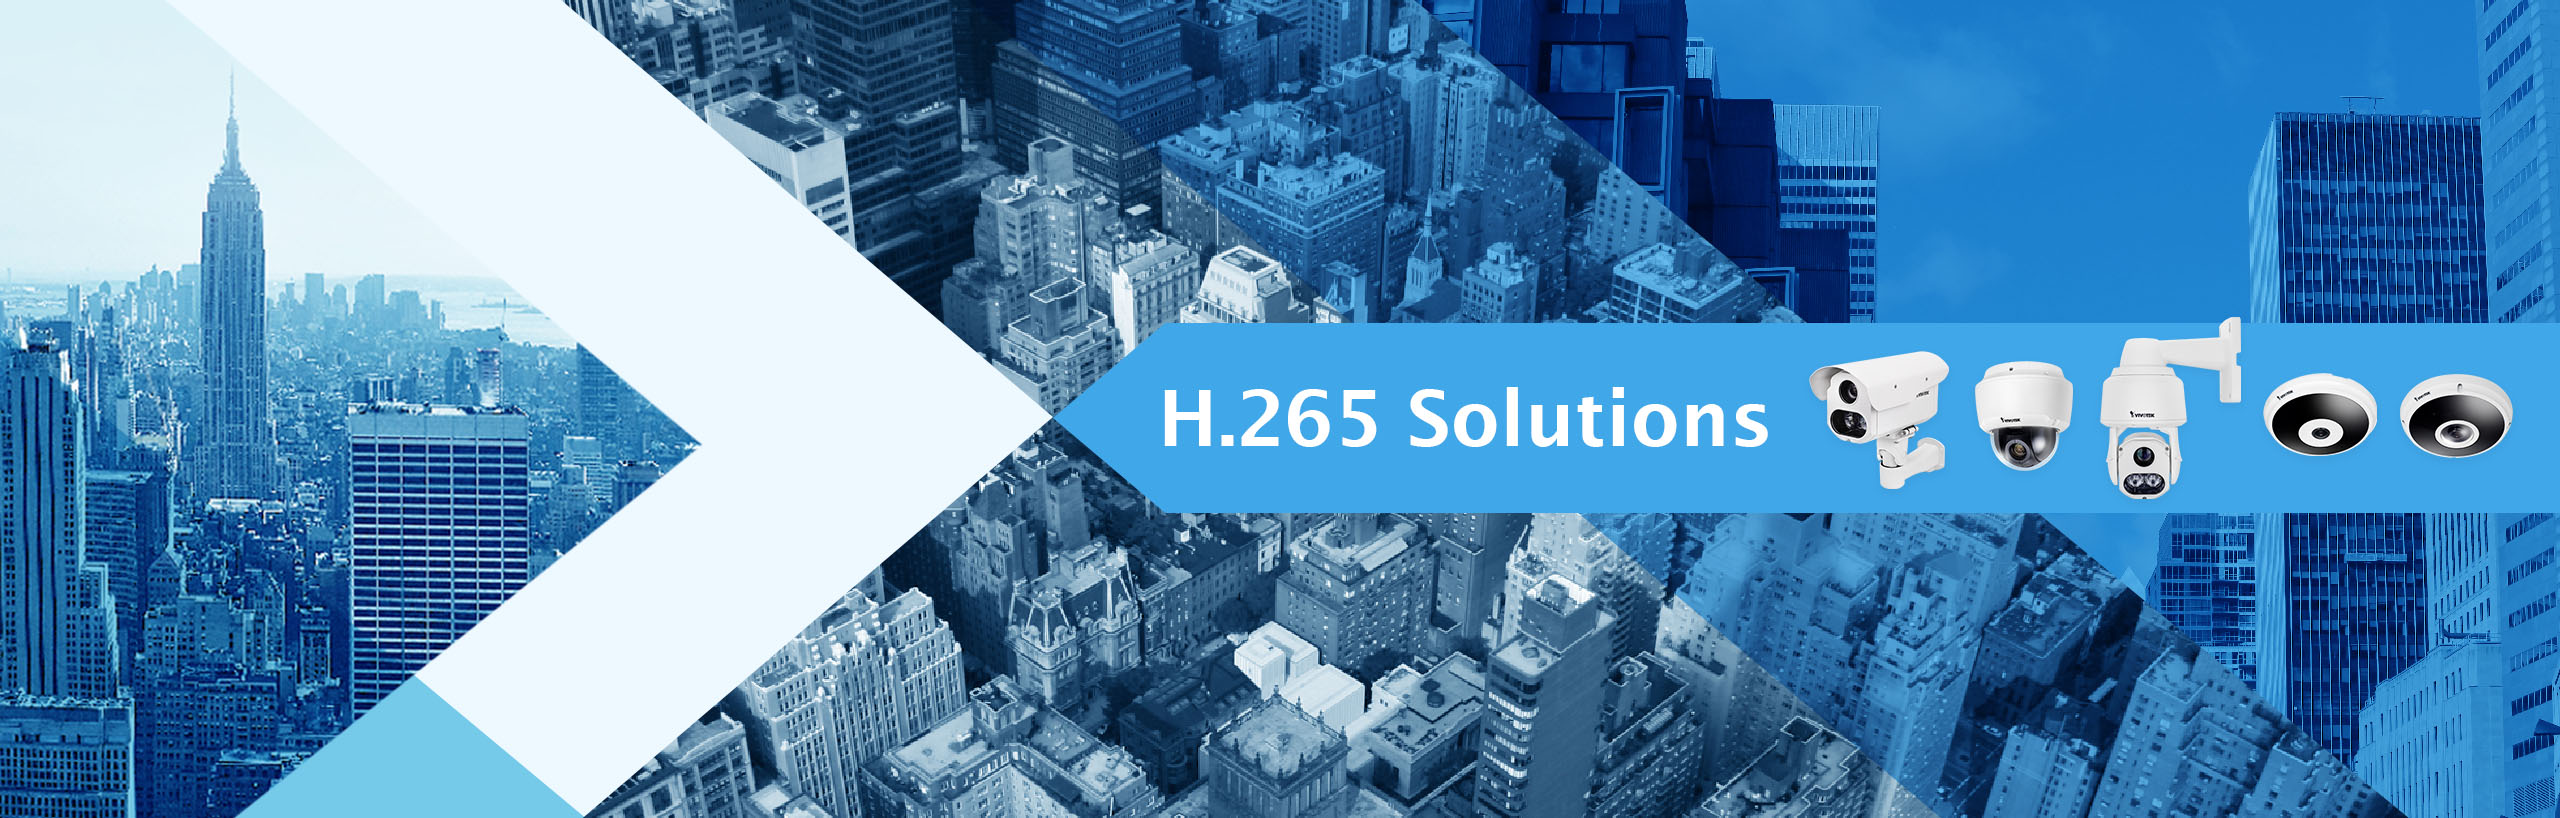 VIVOTEK Expands its Range of H.265 Solutions with Five New Products